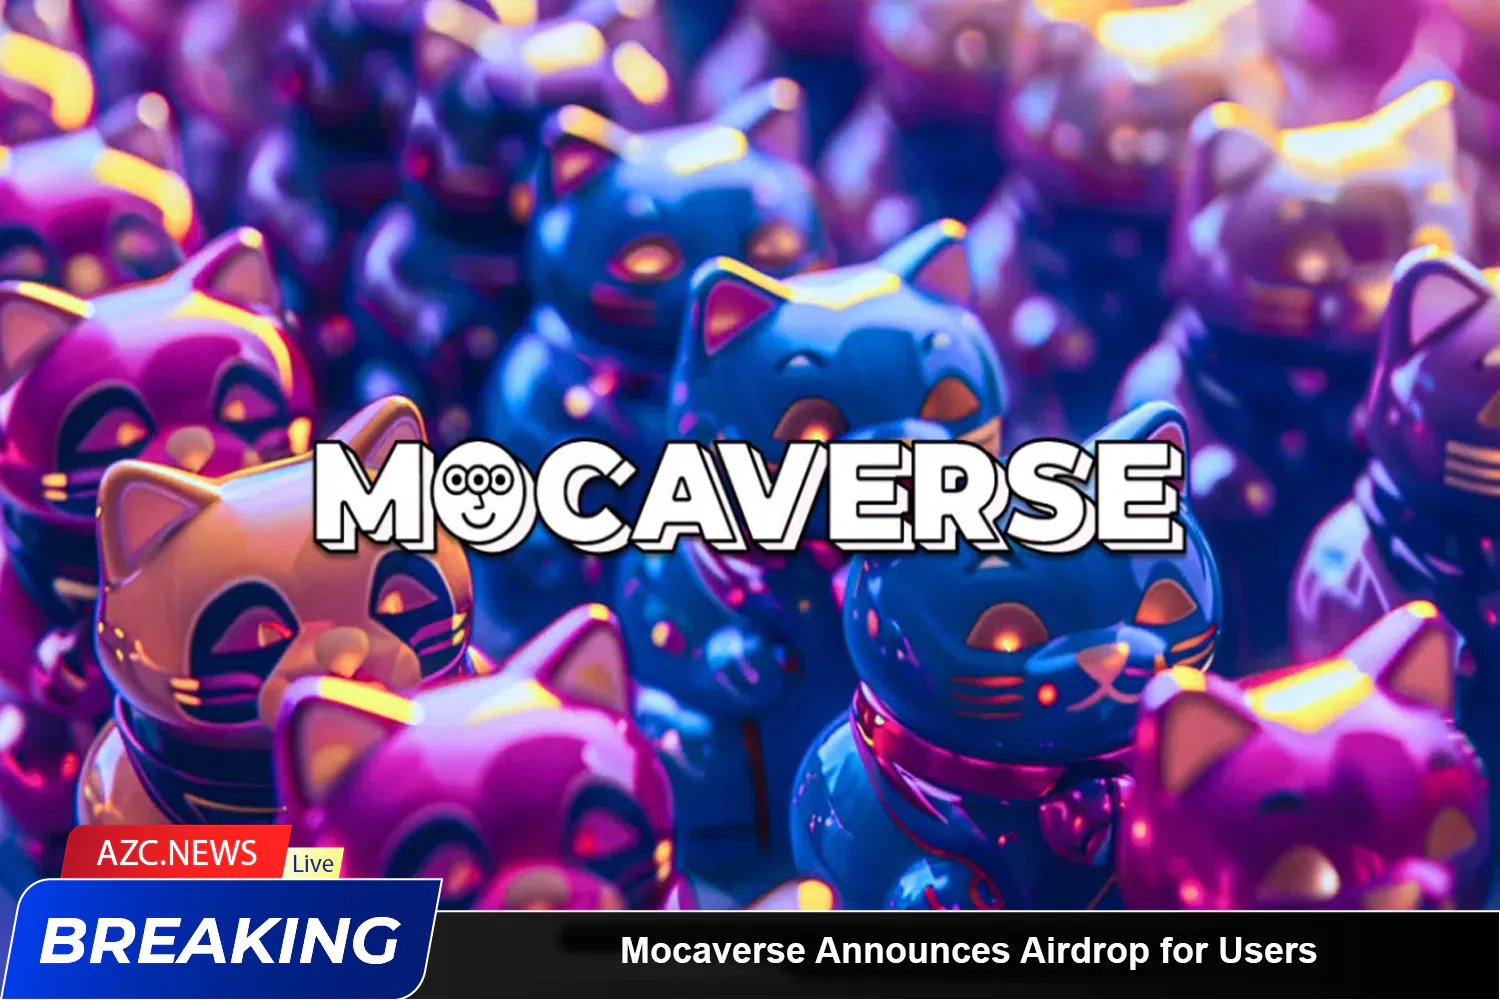 Mocaverse Announces Airdrop For Users